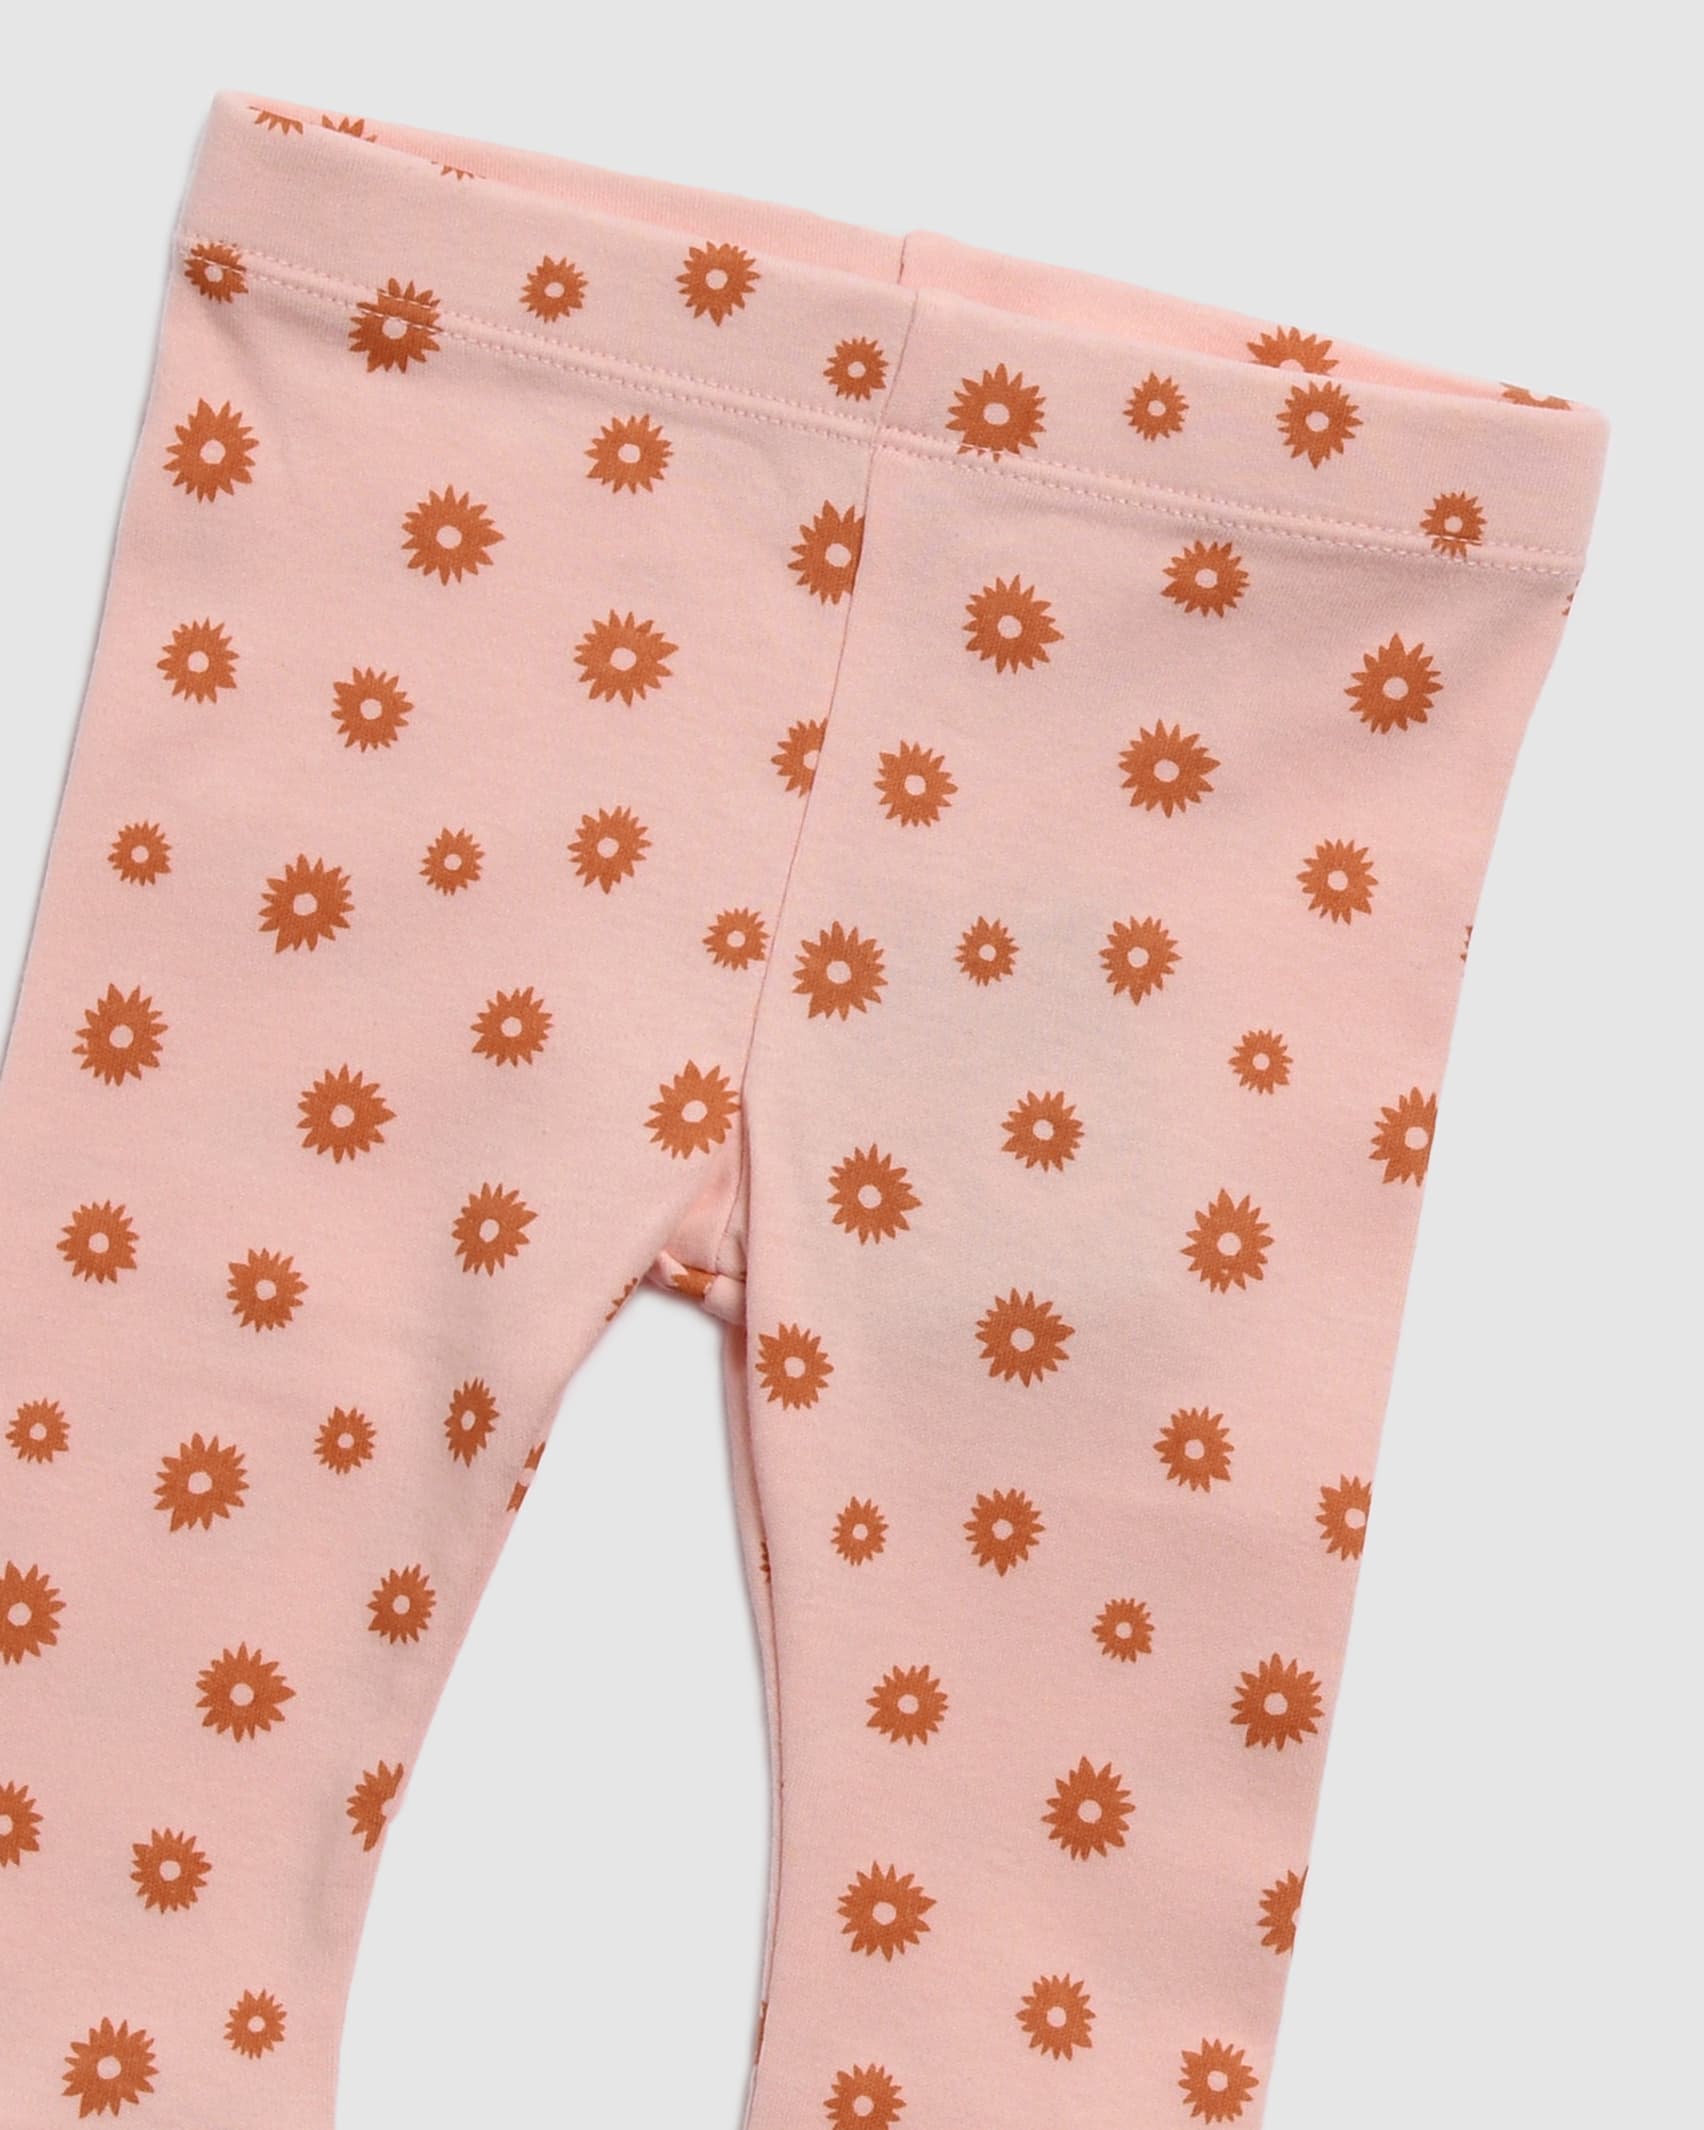 Cleo Cotton Legging in PINK/BROWN